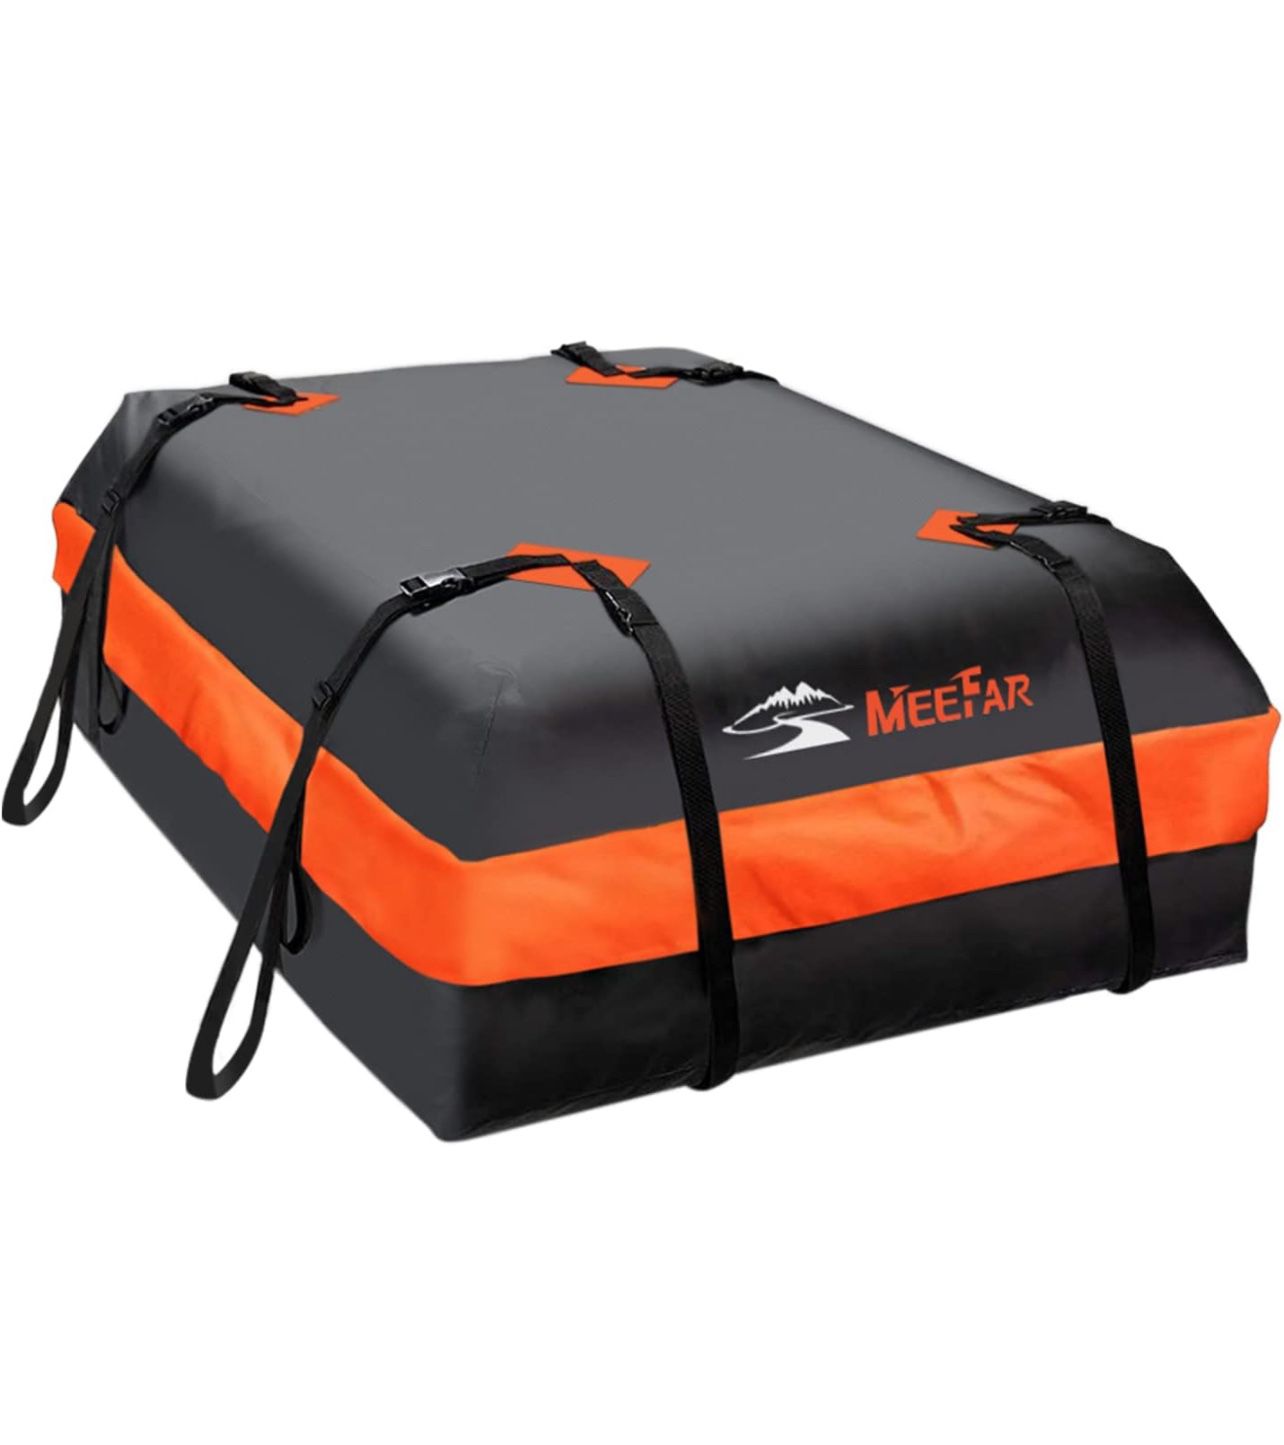 Brandnew Car Roof Bag XBEEK Rooftop top Cargo Carrier Bag Waterproof 15 Cubic feet for All Cars with/Without Rack, Includes Anti-Slip Mat, 8 Reinforce